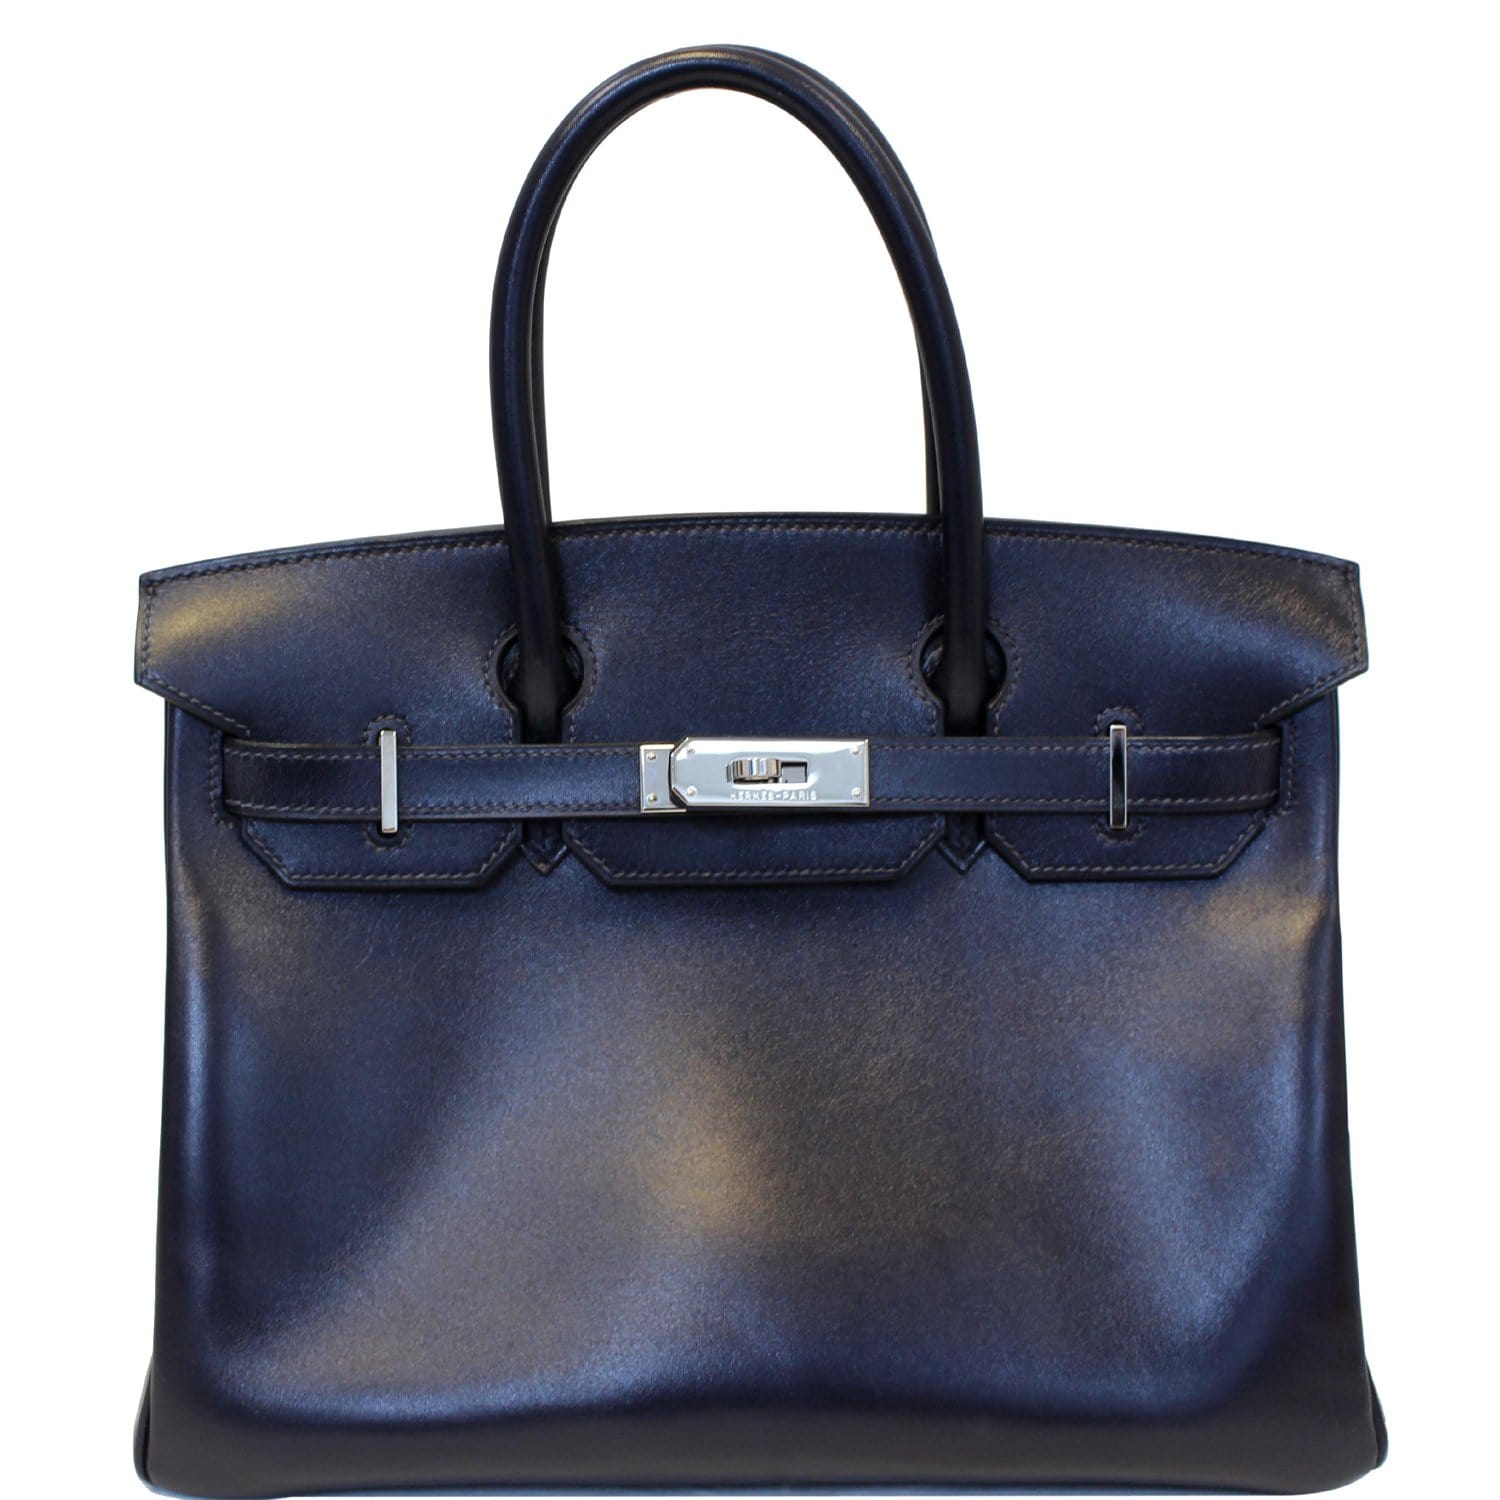 My Favorite Fall Bags: Hermes Birkin and Chanel Bags in Navy 